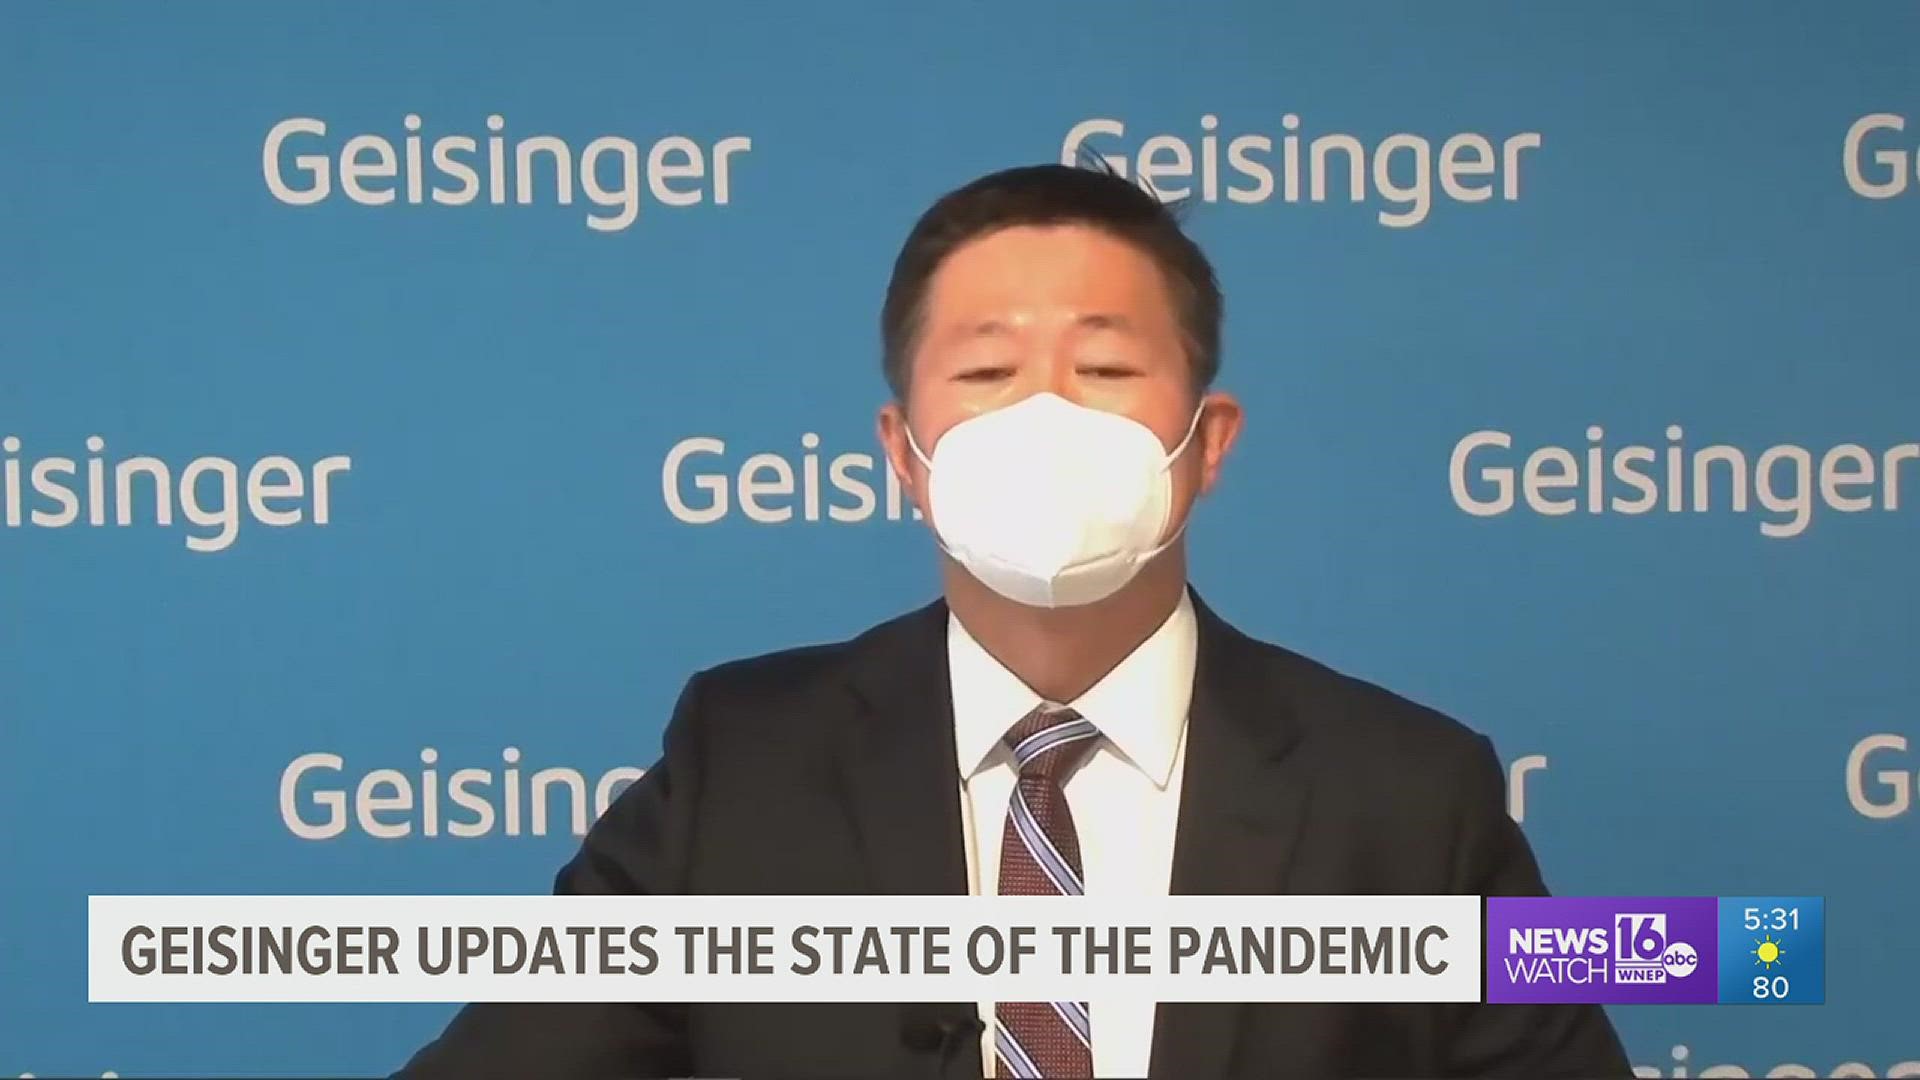 President and CEO of Geisinger, Dr. Jaewon Ryu spoke at a virtual news conference this morning about the ongoing conditions of the pandemic.